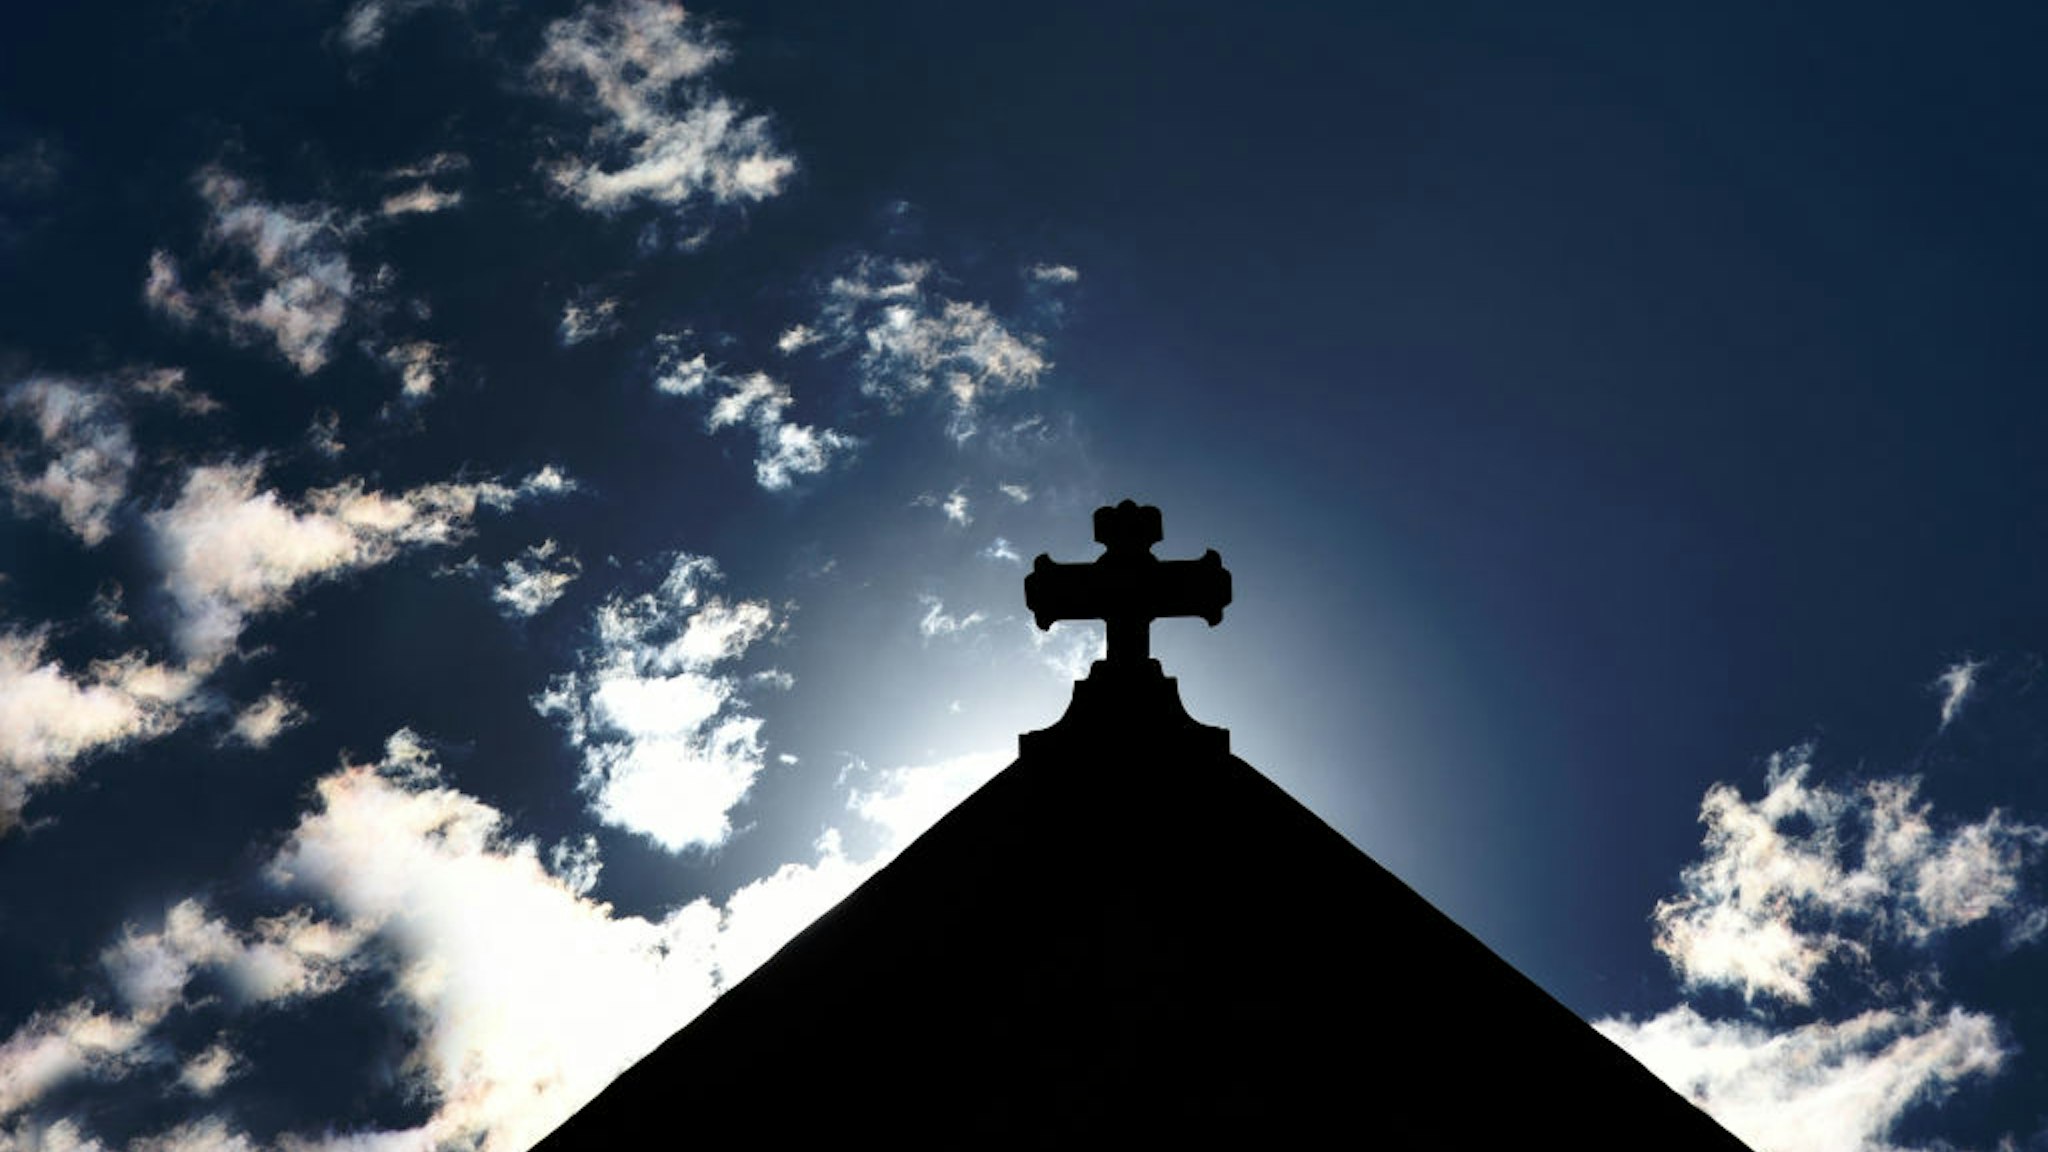 SANTA FE, NEW MEXICO - AUGUST 17, 2019: The morning sun rises behind a cross atop a Catholic church in Santa Fe, Newico. (Photo by Robert Alexander/Getty Images)